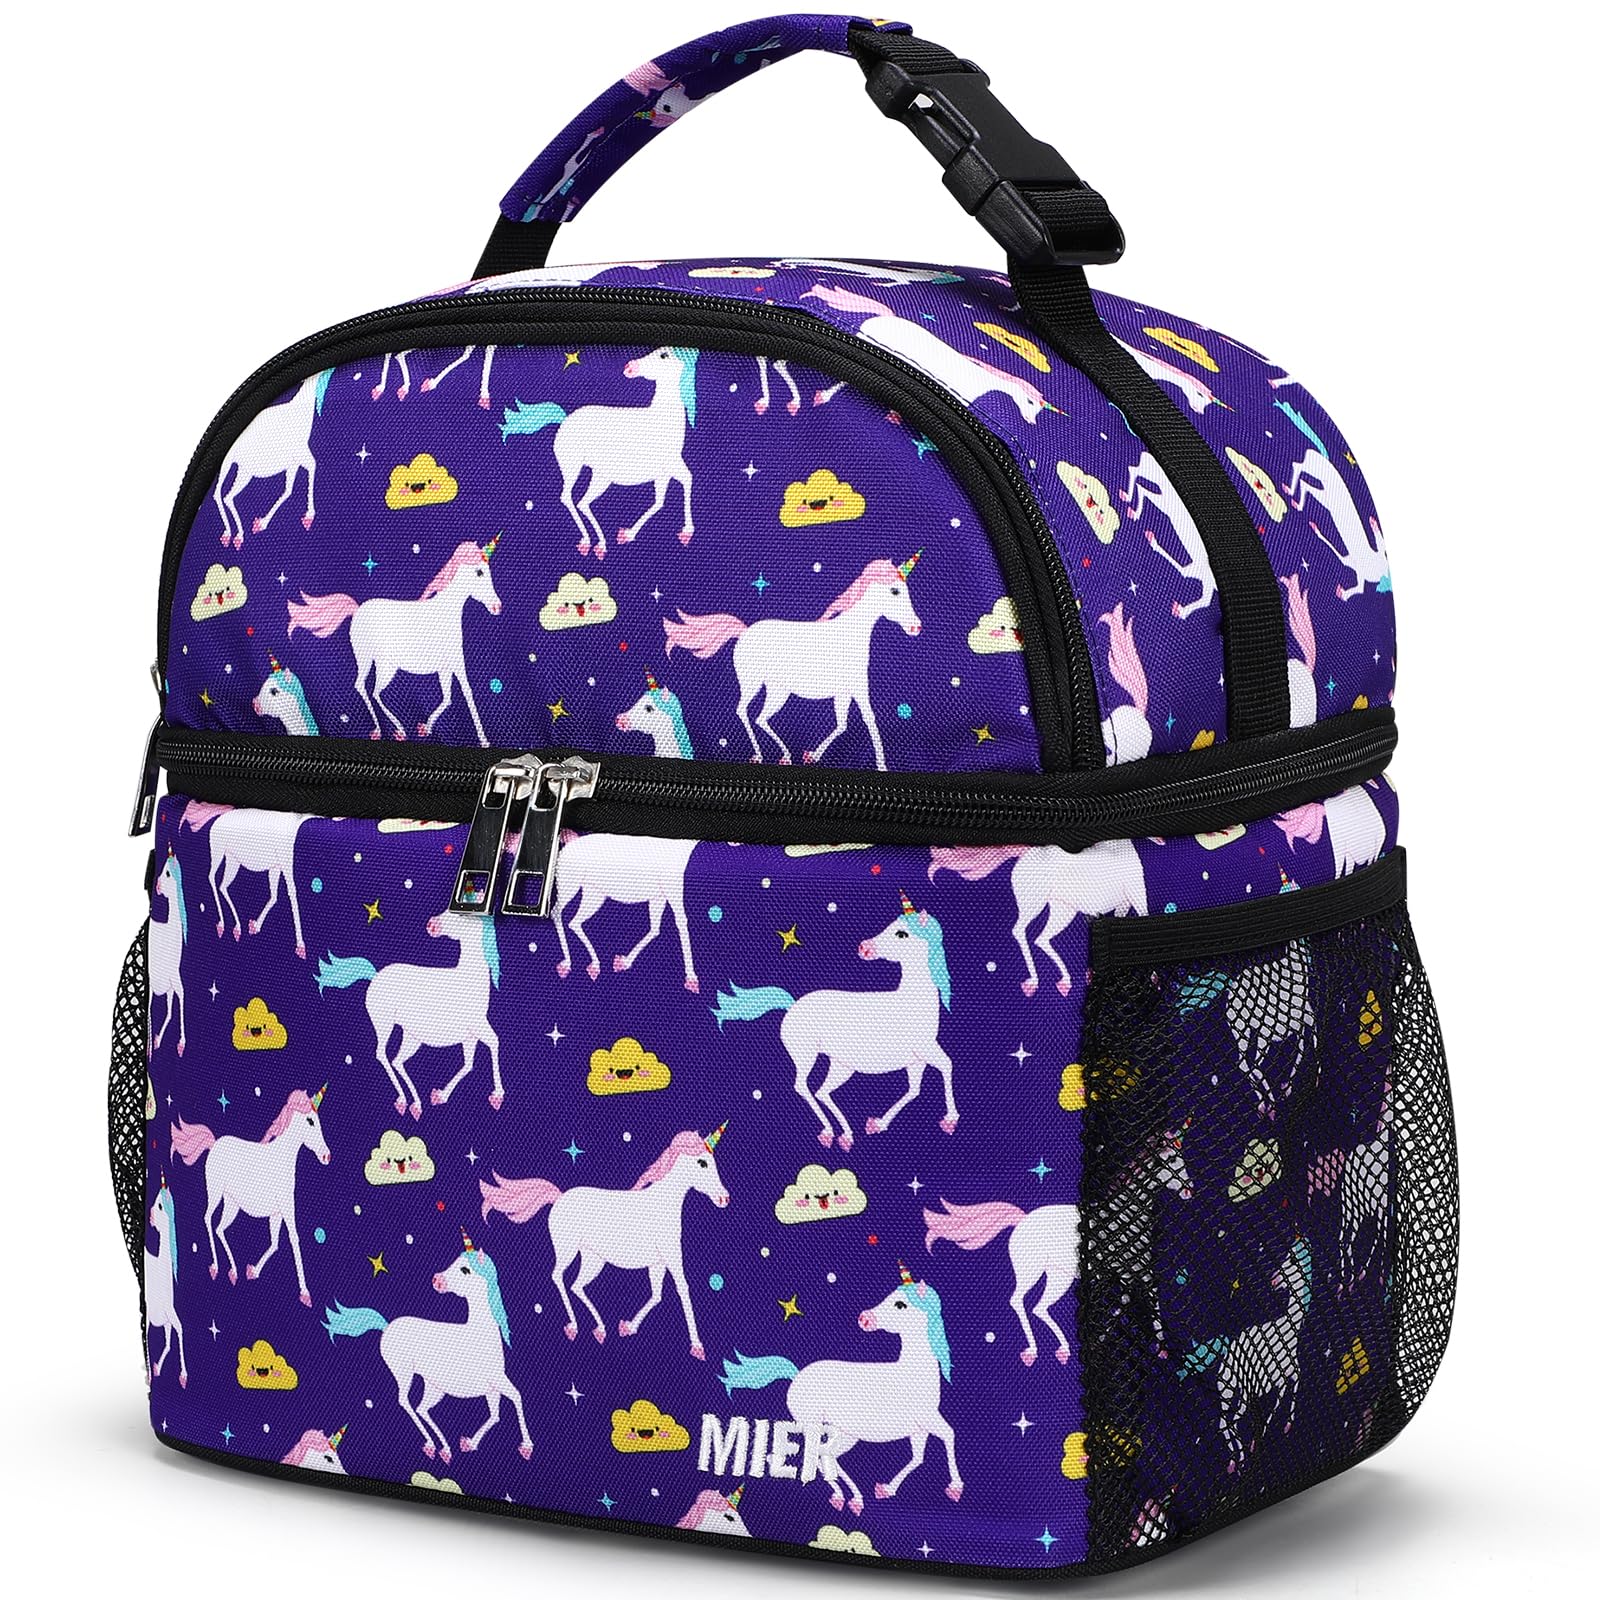 Kids Lunch Box Insulated Kids Lunch Bag,Lunch Box for Kids Girls